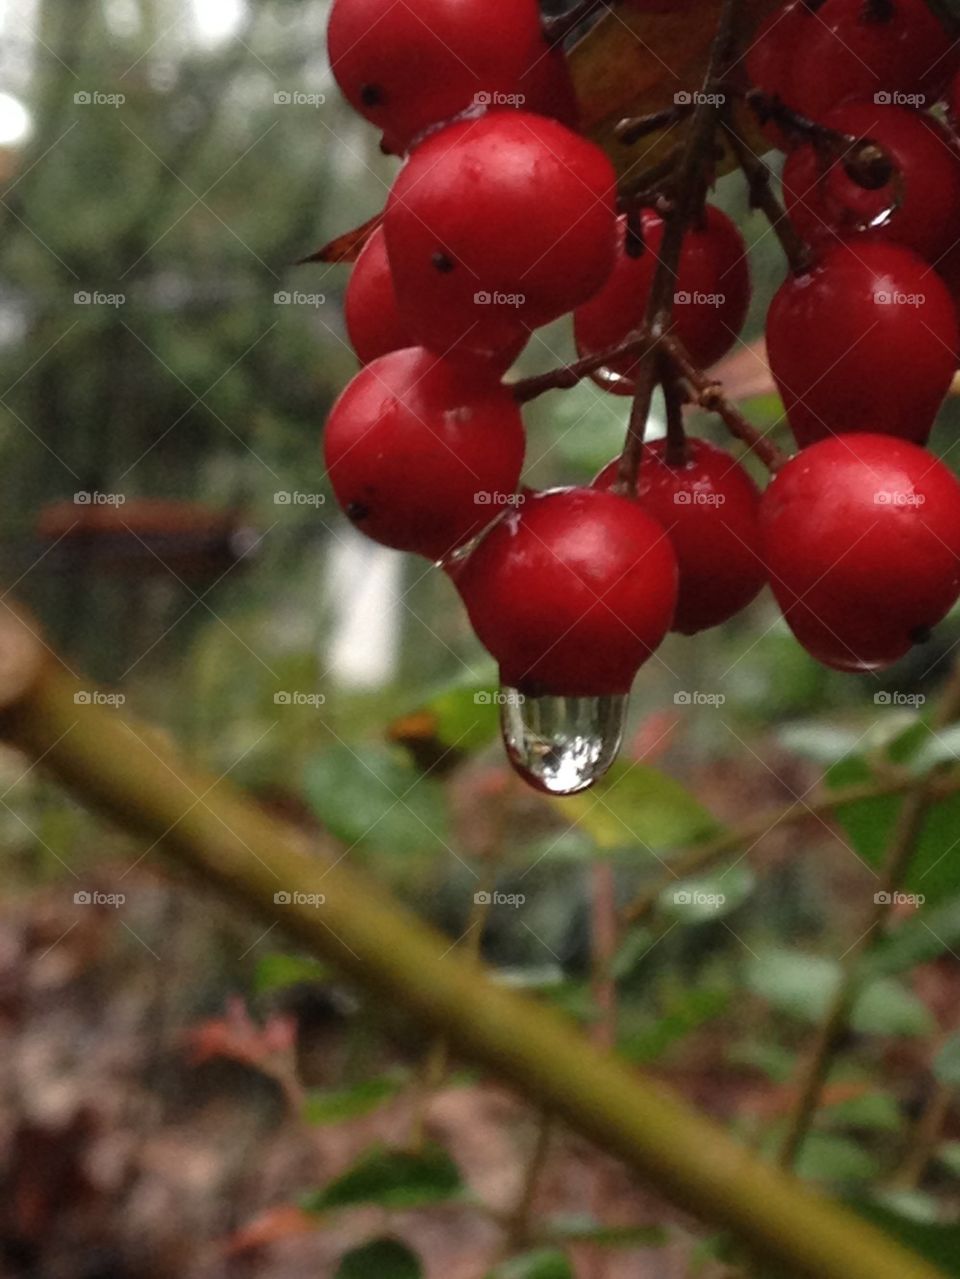 Berries after the rain